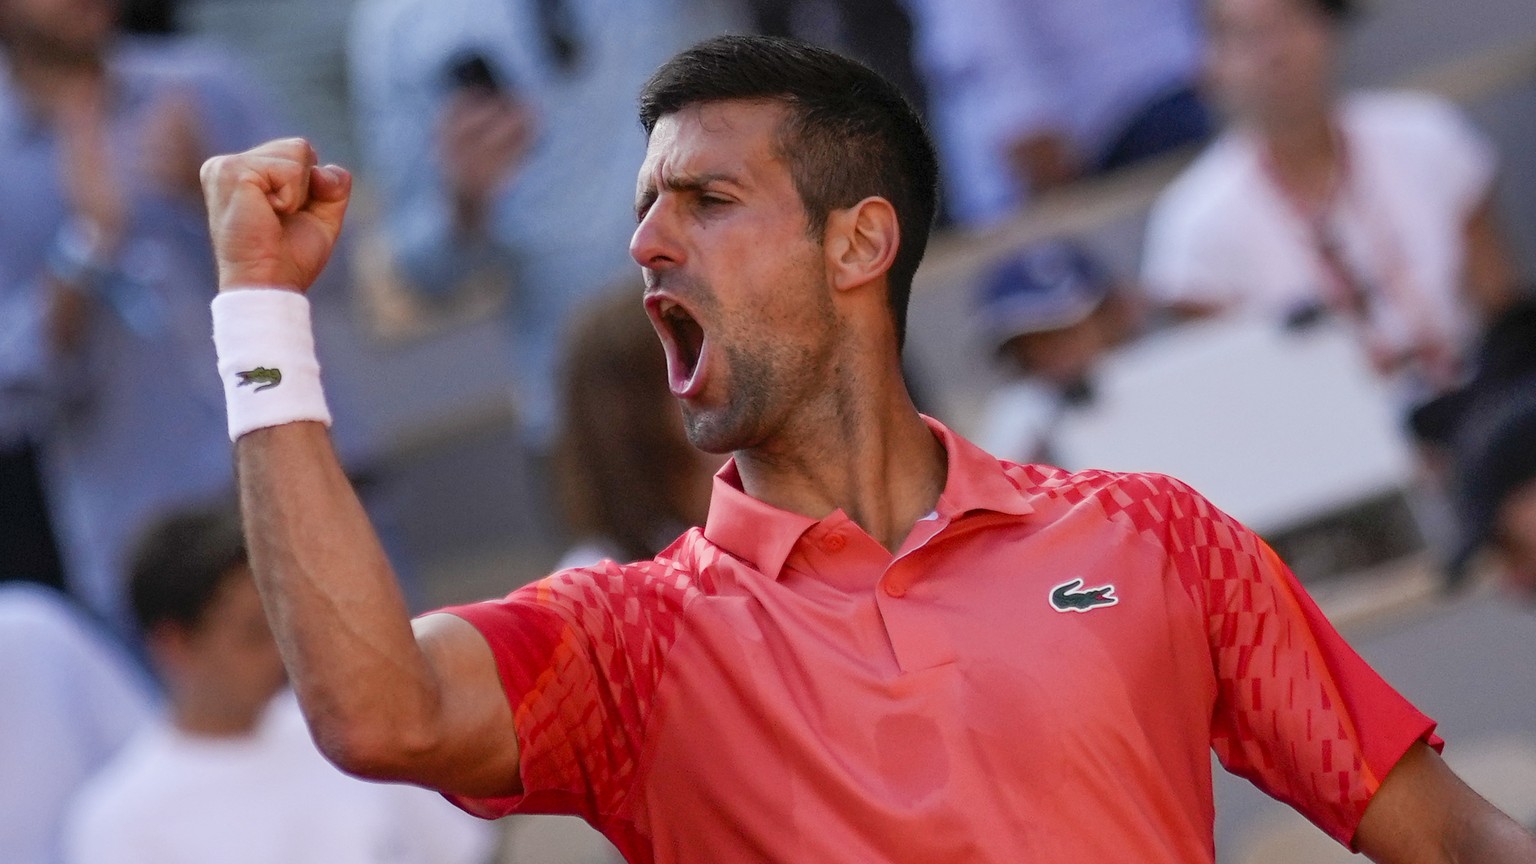 Serbia&#039;s Novak Djokovic celebrates winning his quarterfinal match of the French Open tennis tournament against Russia&#039;s Karen Khachanov in four sets, 4-6, 7-6 (7-0), 6-2, 6-4, at the Roland  ...